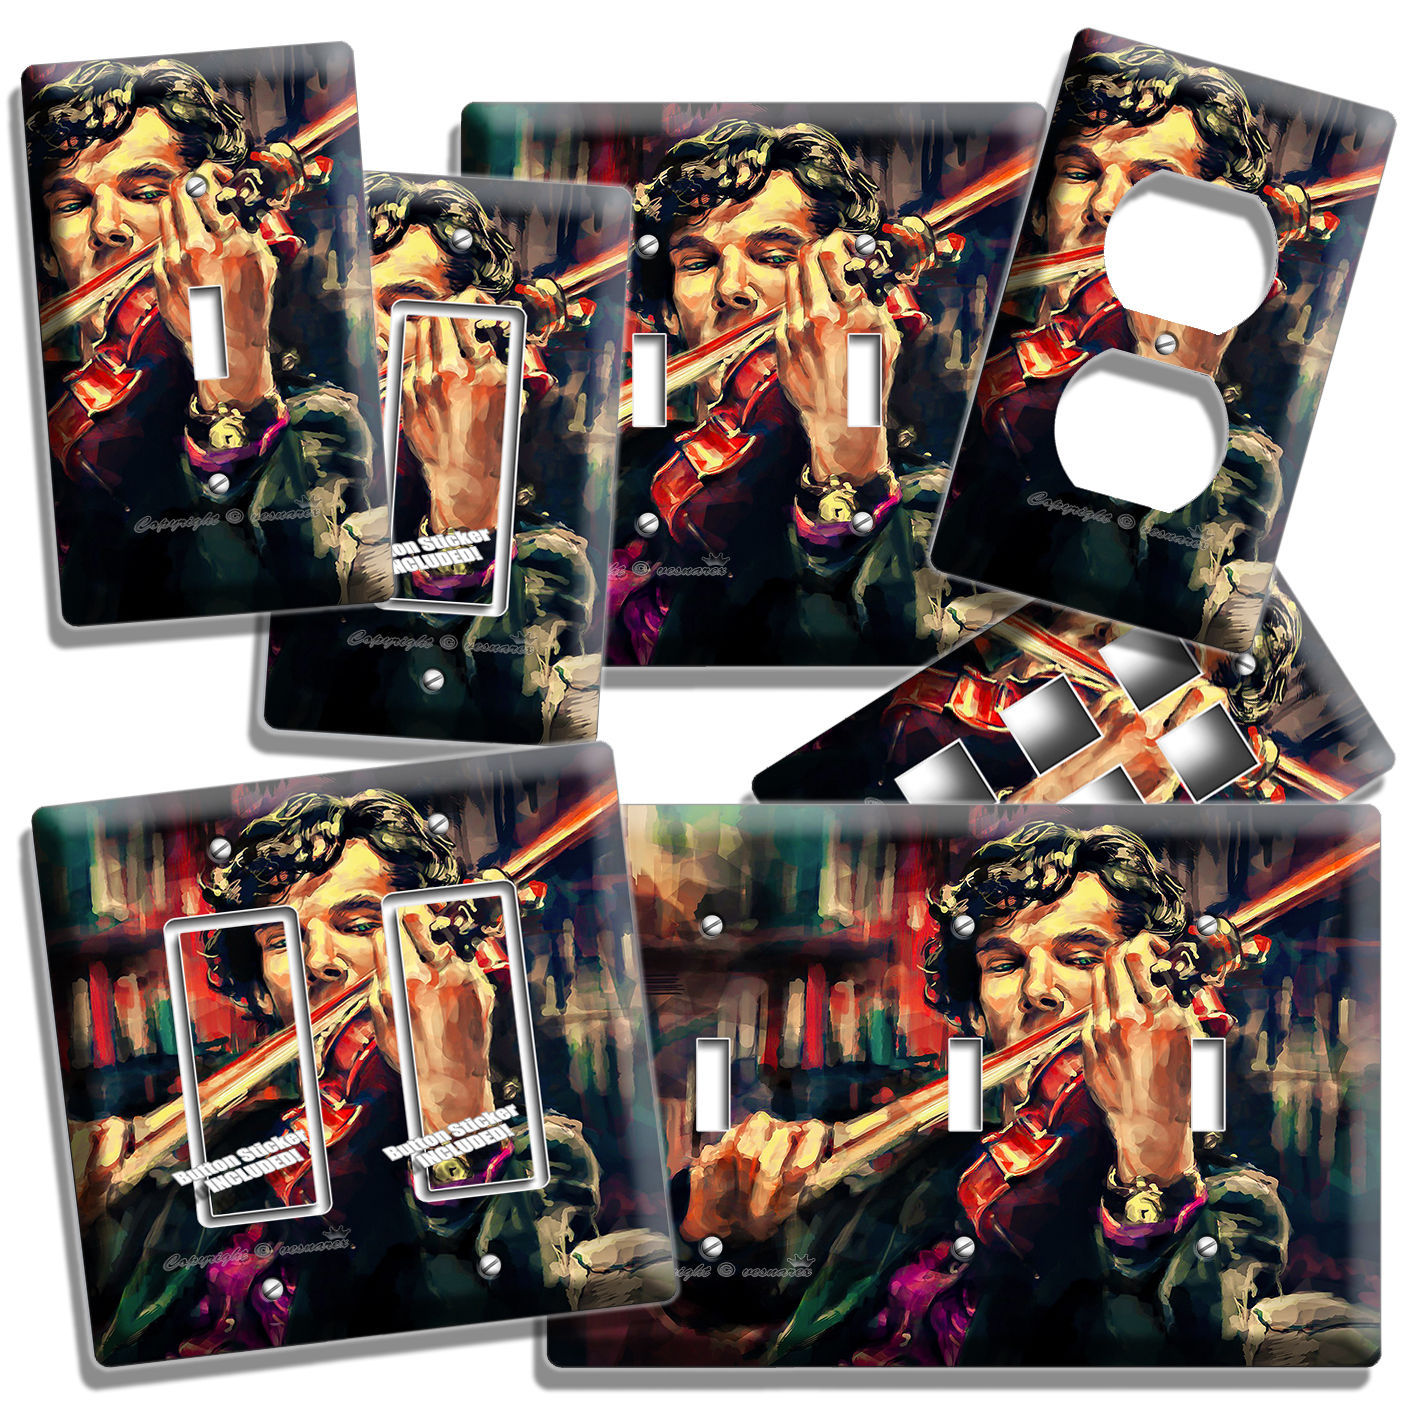 SHERLOCK HOLMES VIOLIN BENEDICT CUMBERBATCH LIGHT SWITCH OUTLET WALL ROOM DECOR - $16.19 - $26.99